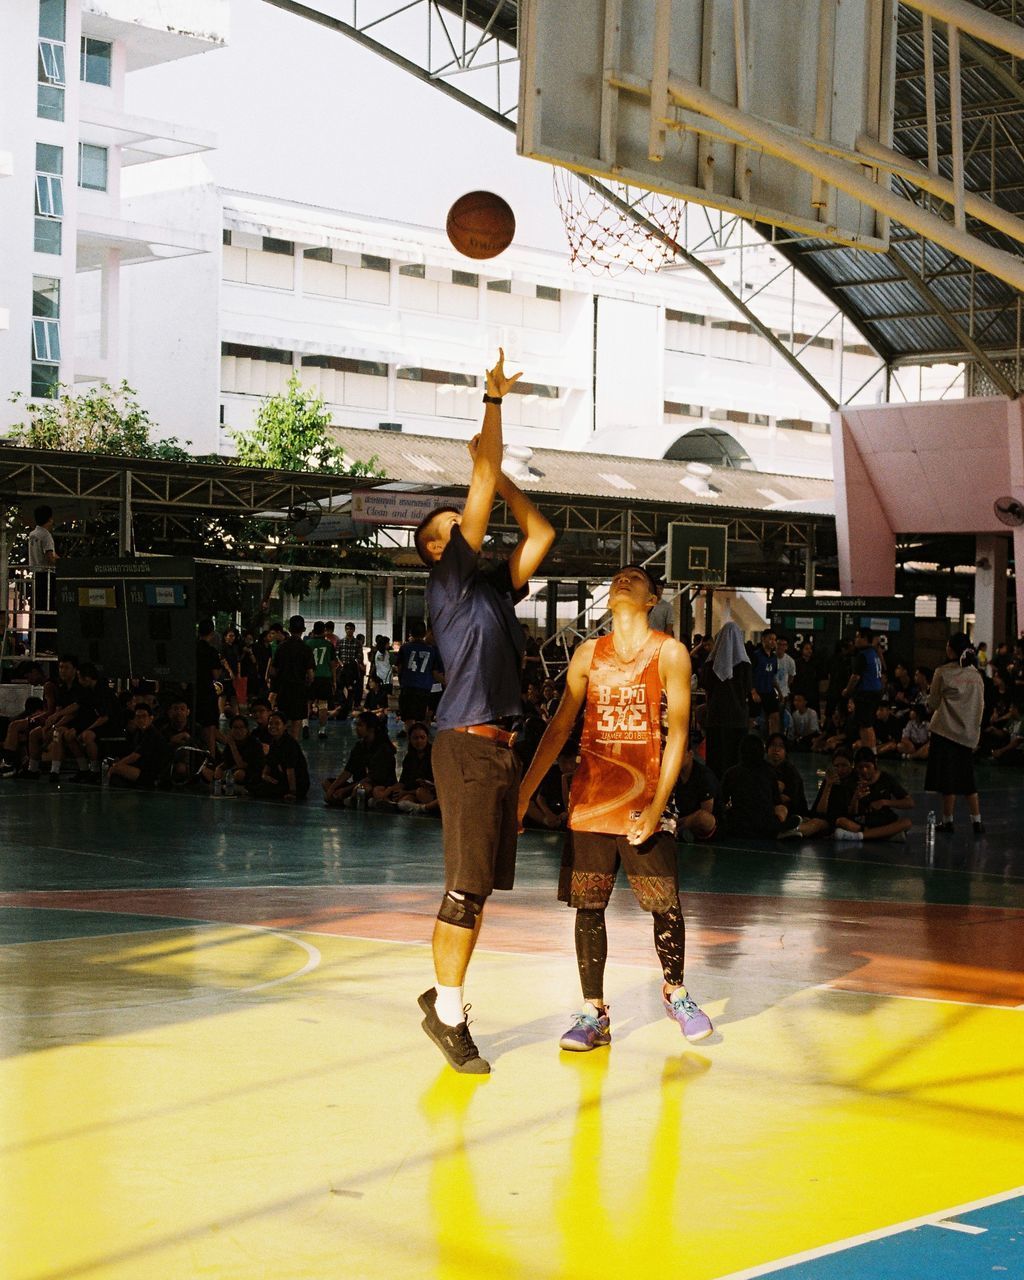 GROUP OF PEOPLE PLAYING WITH BALL IN BASKETBALL